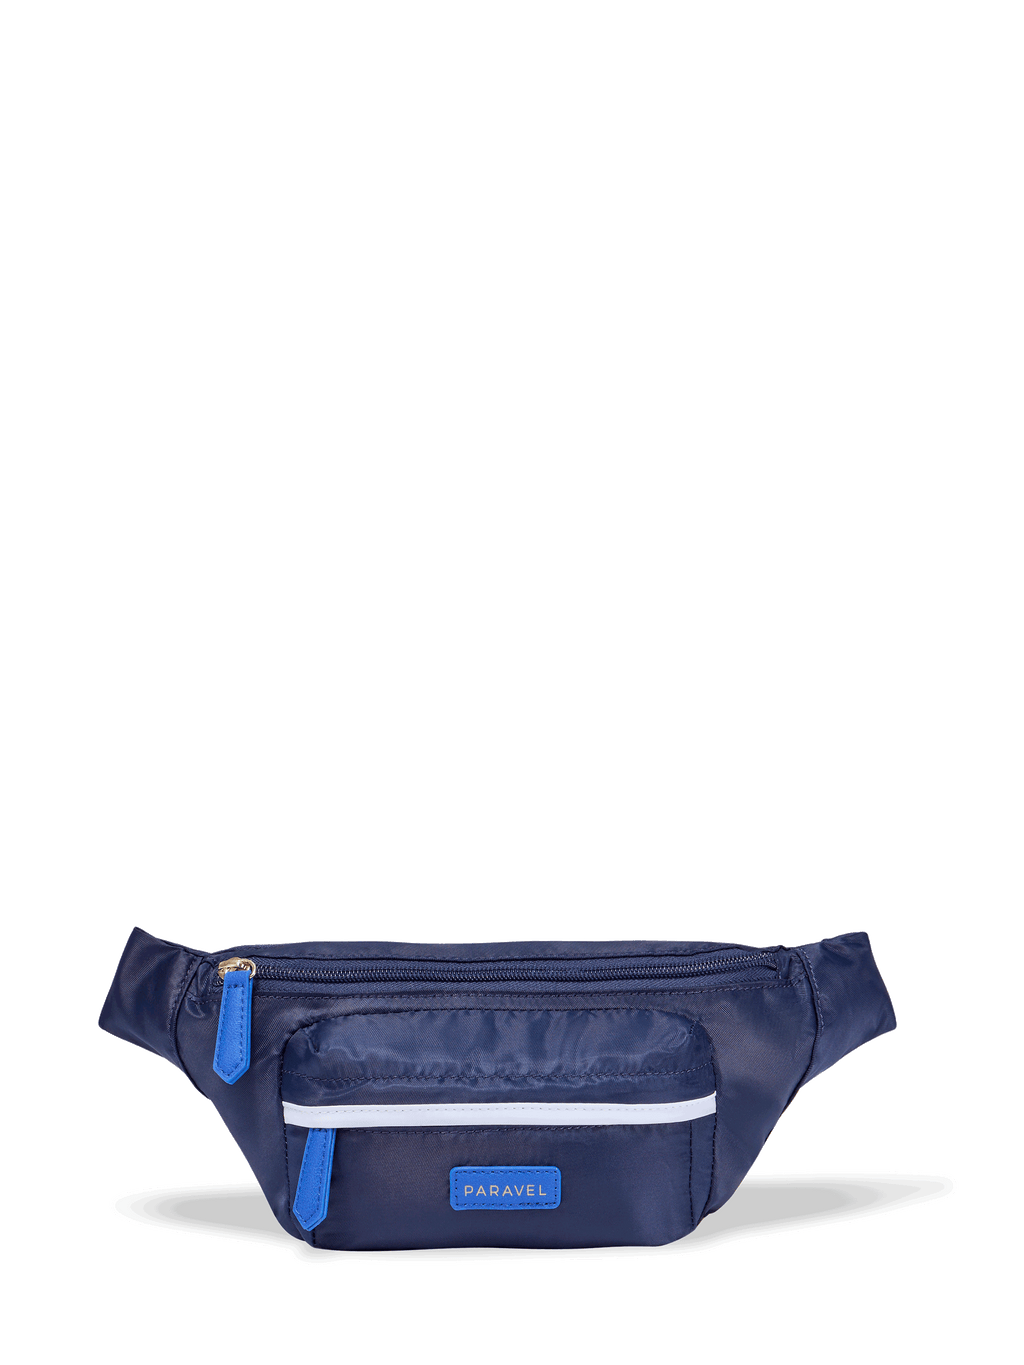 Handbag Organizer for Bumbag (More colors available)